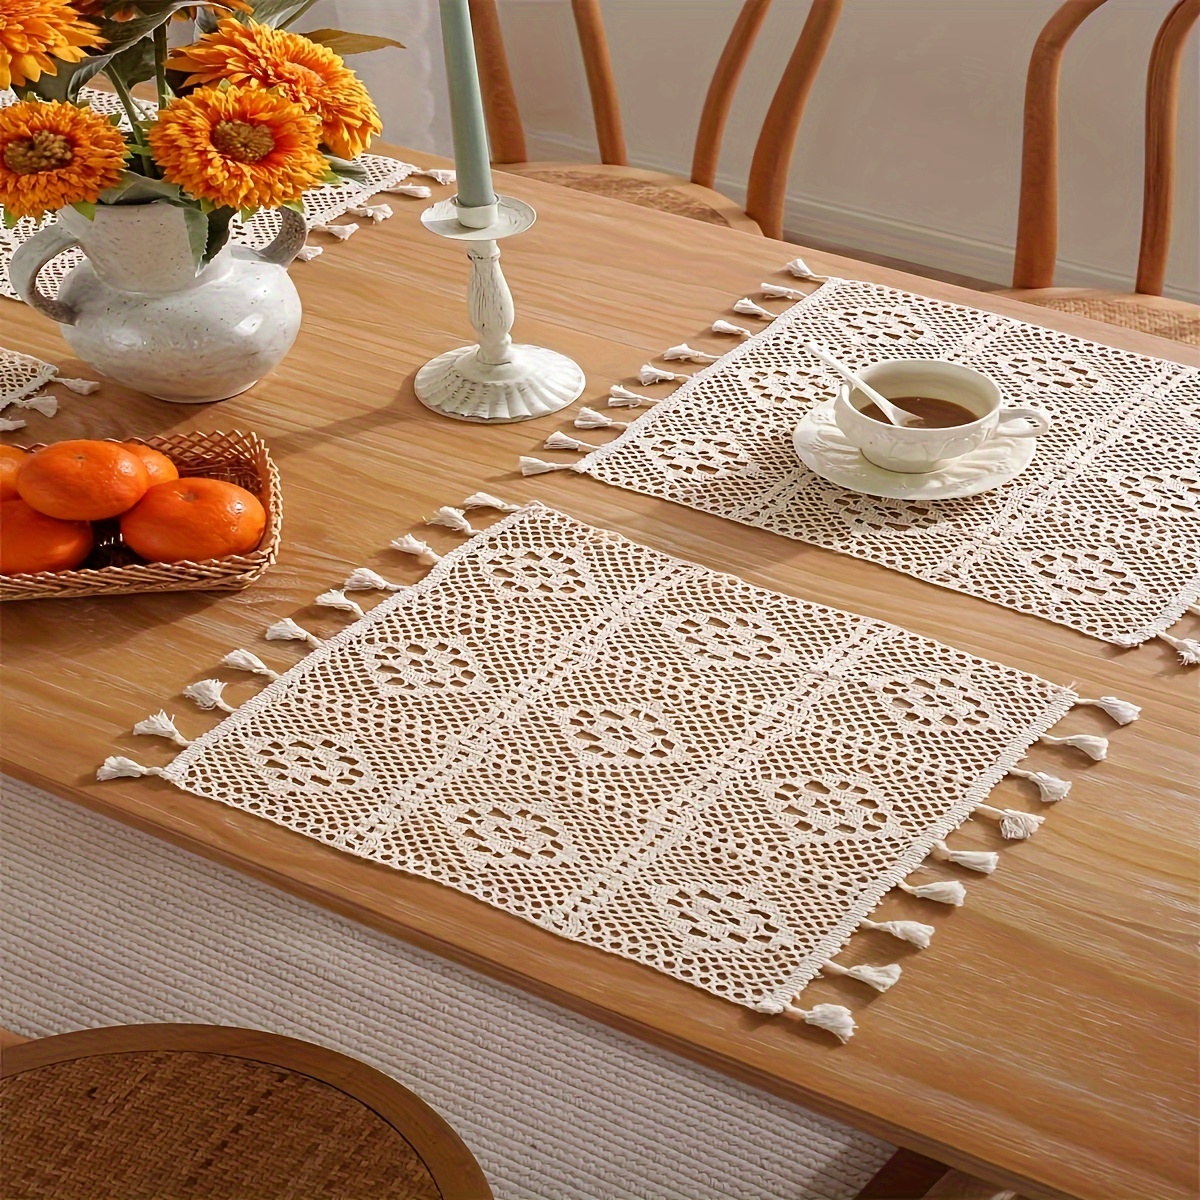 

Bohemian Chic Handmade Cotton Placemat With Tassels - Square Crochet Lace Table Mat For Dining, Kitchen & Wedding Decor - Rustic Natural Beige, Polyester, Woven Design